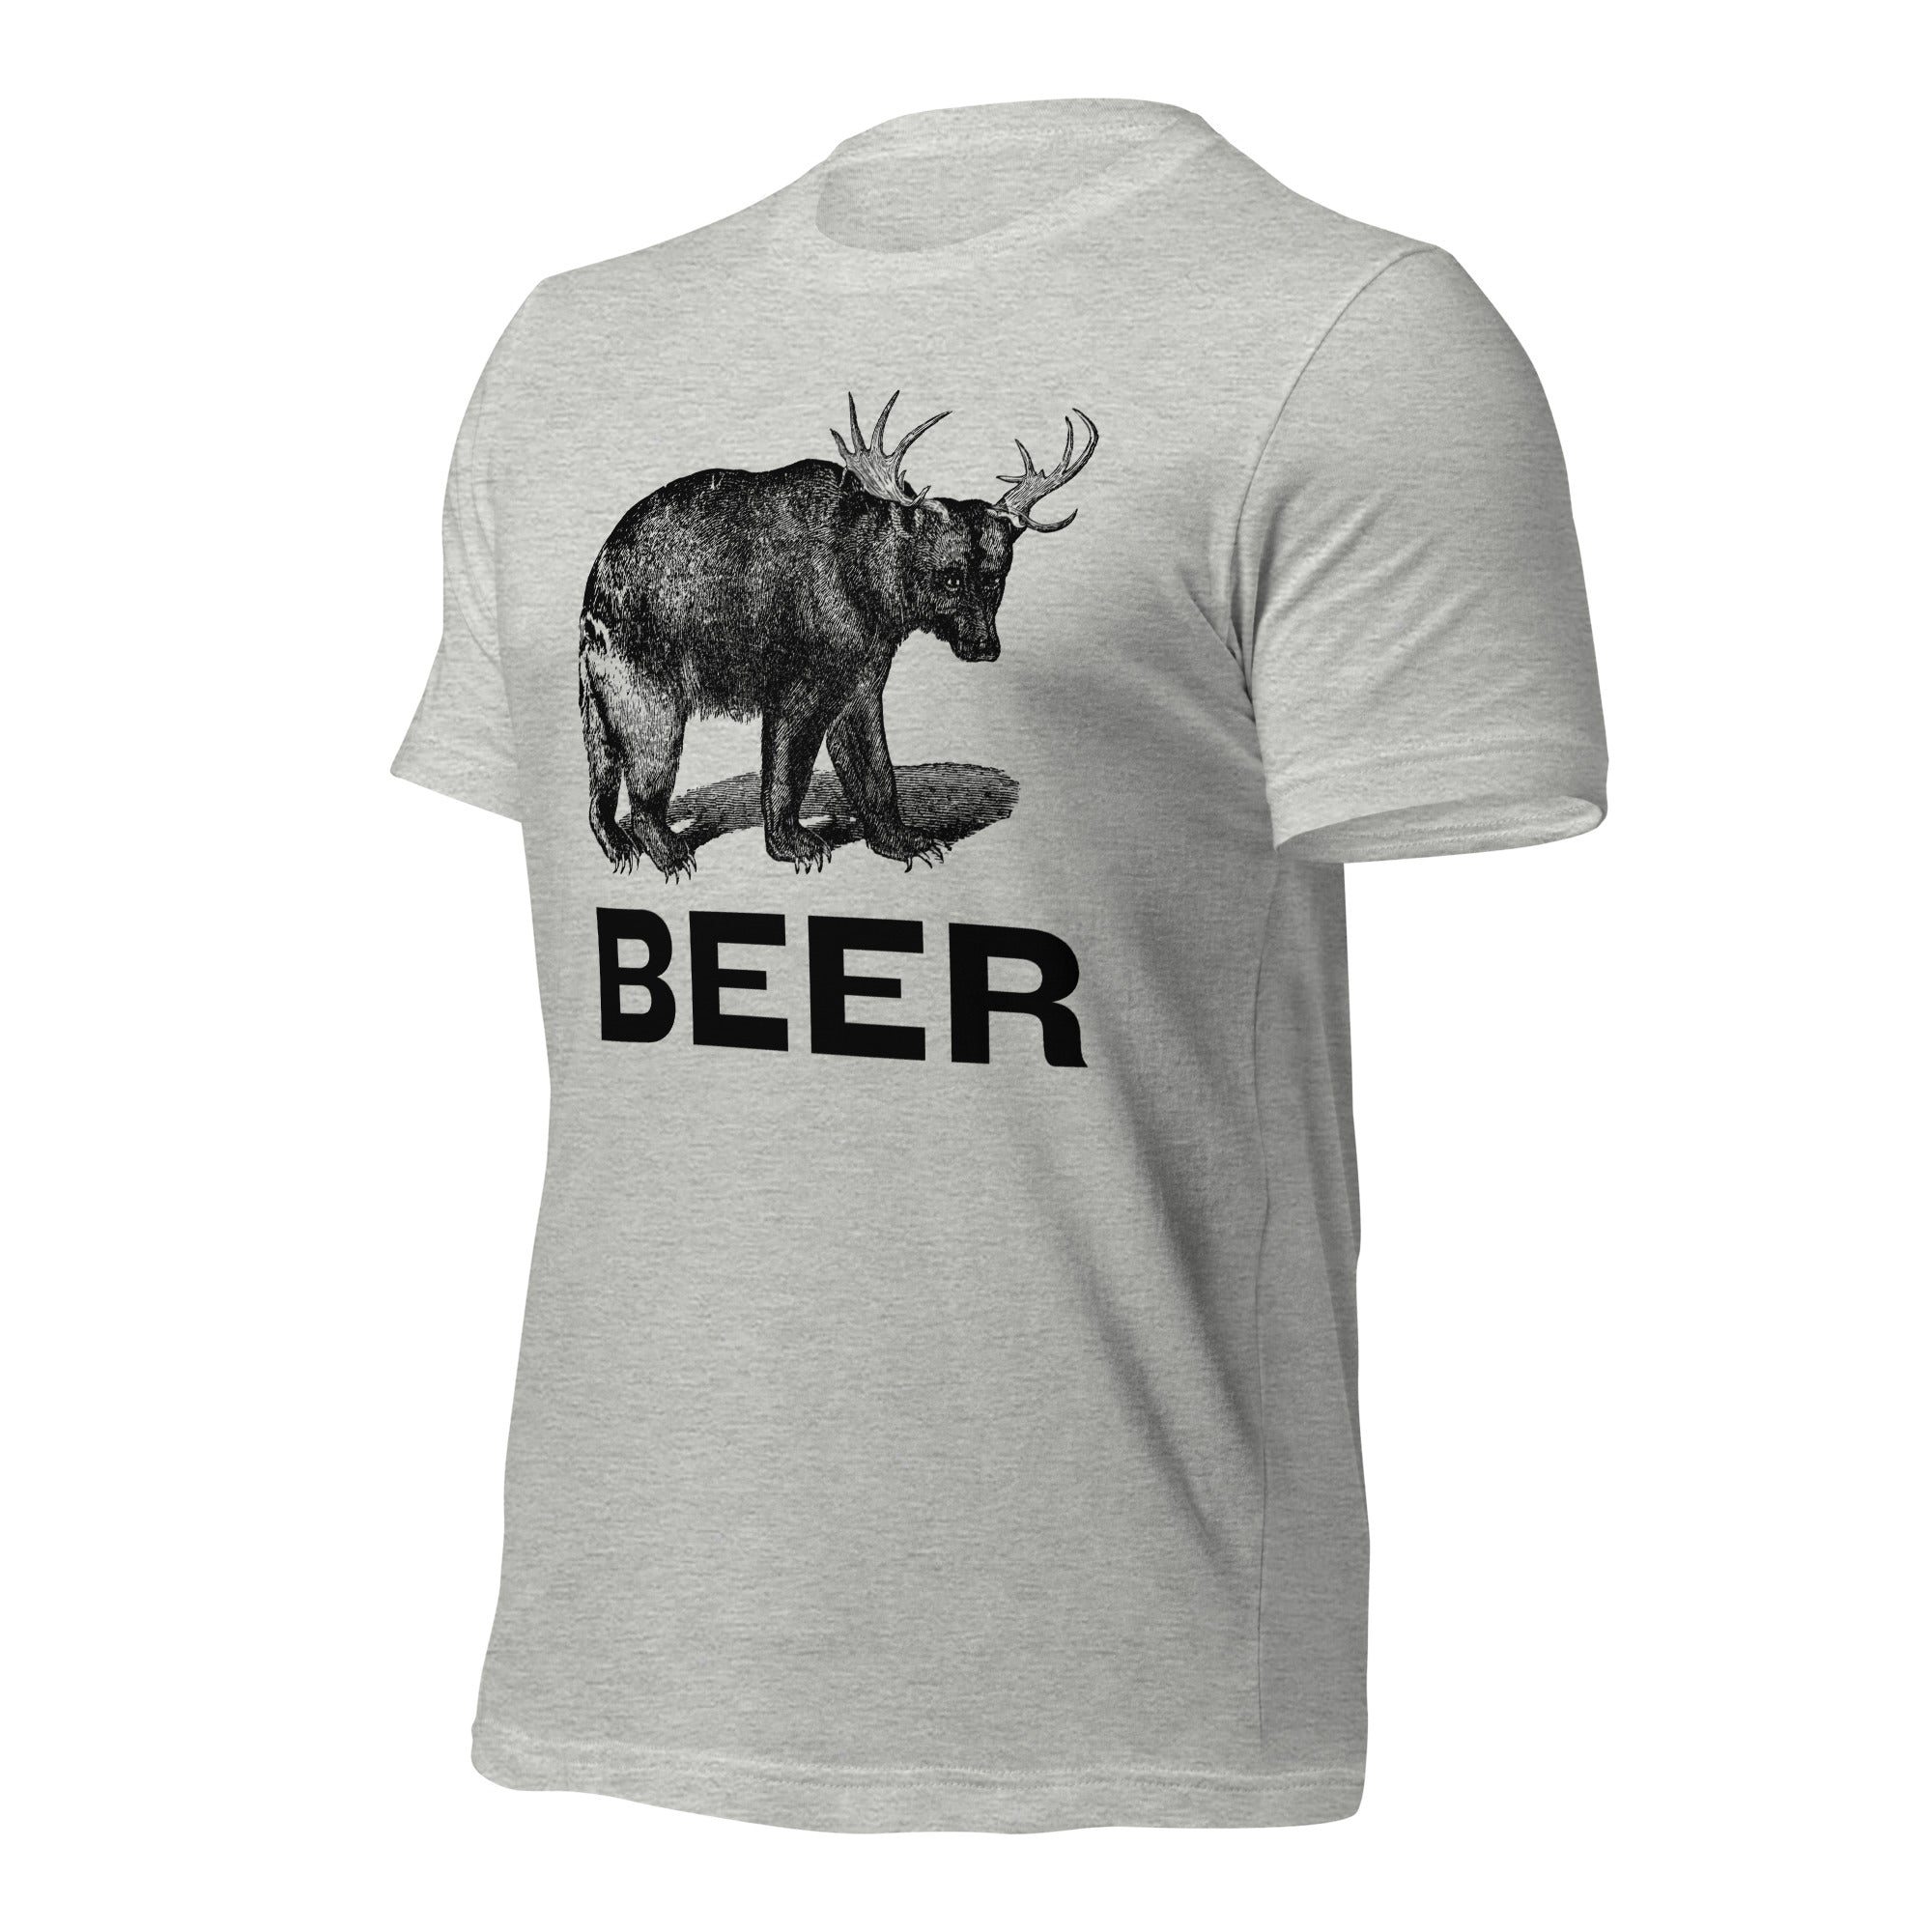 Beer Graphic T-Shirt